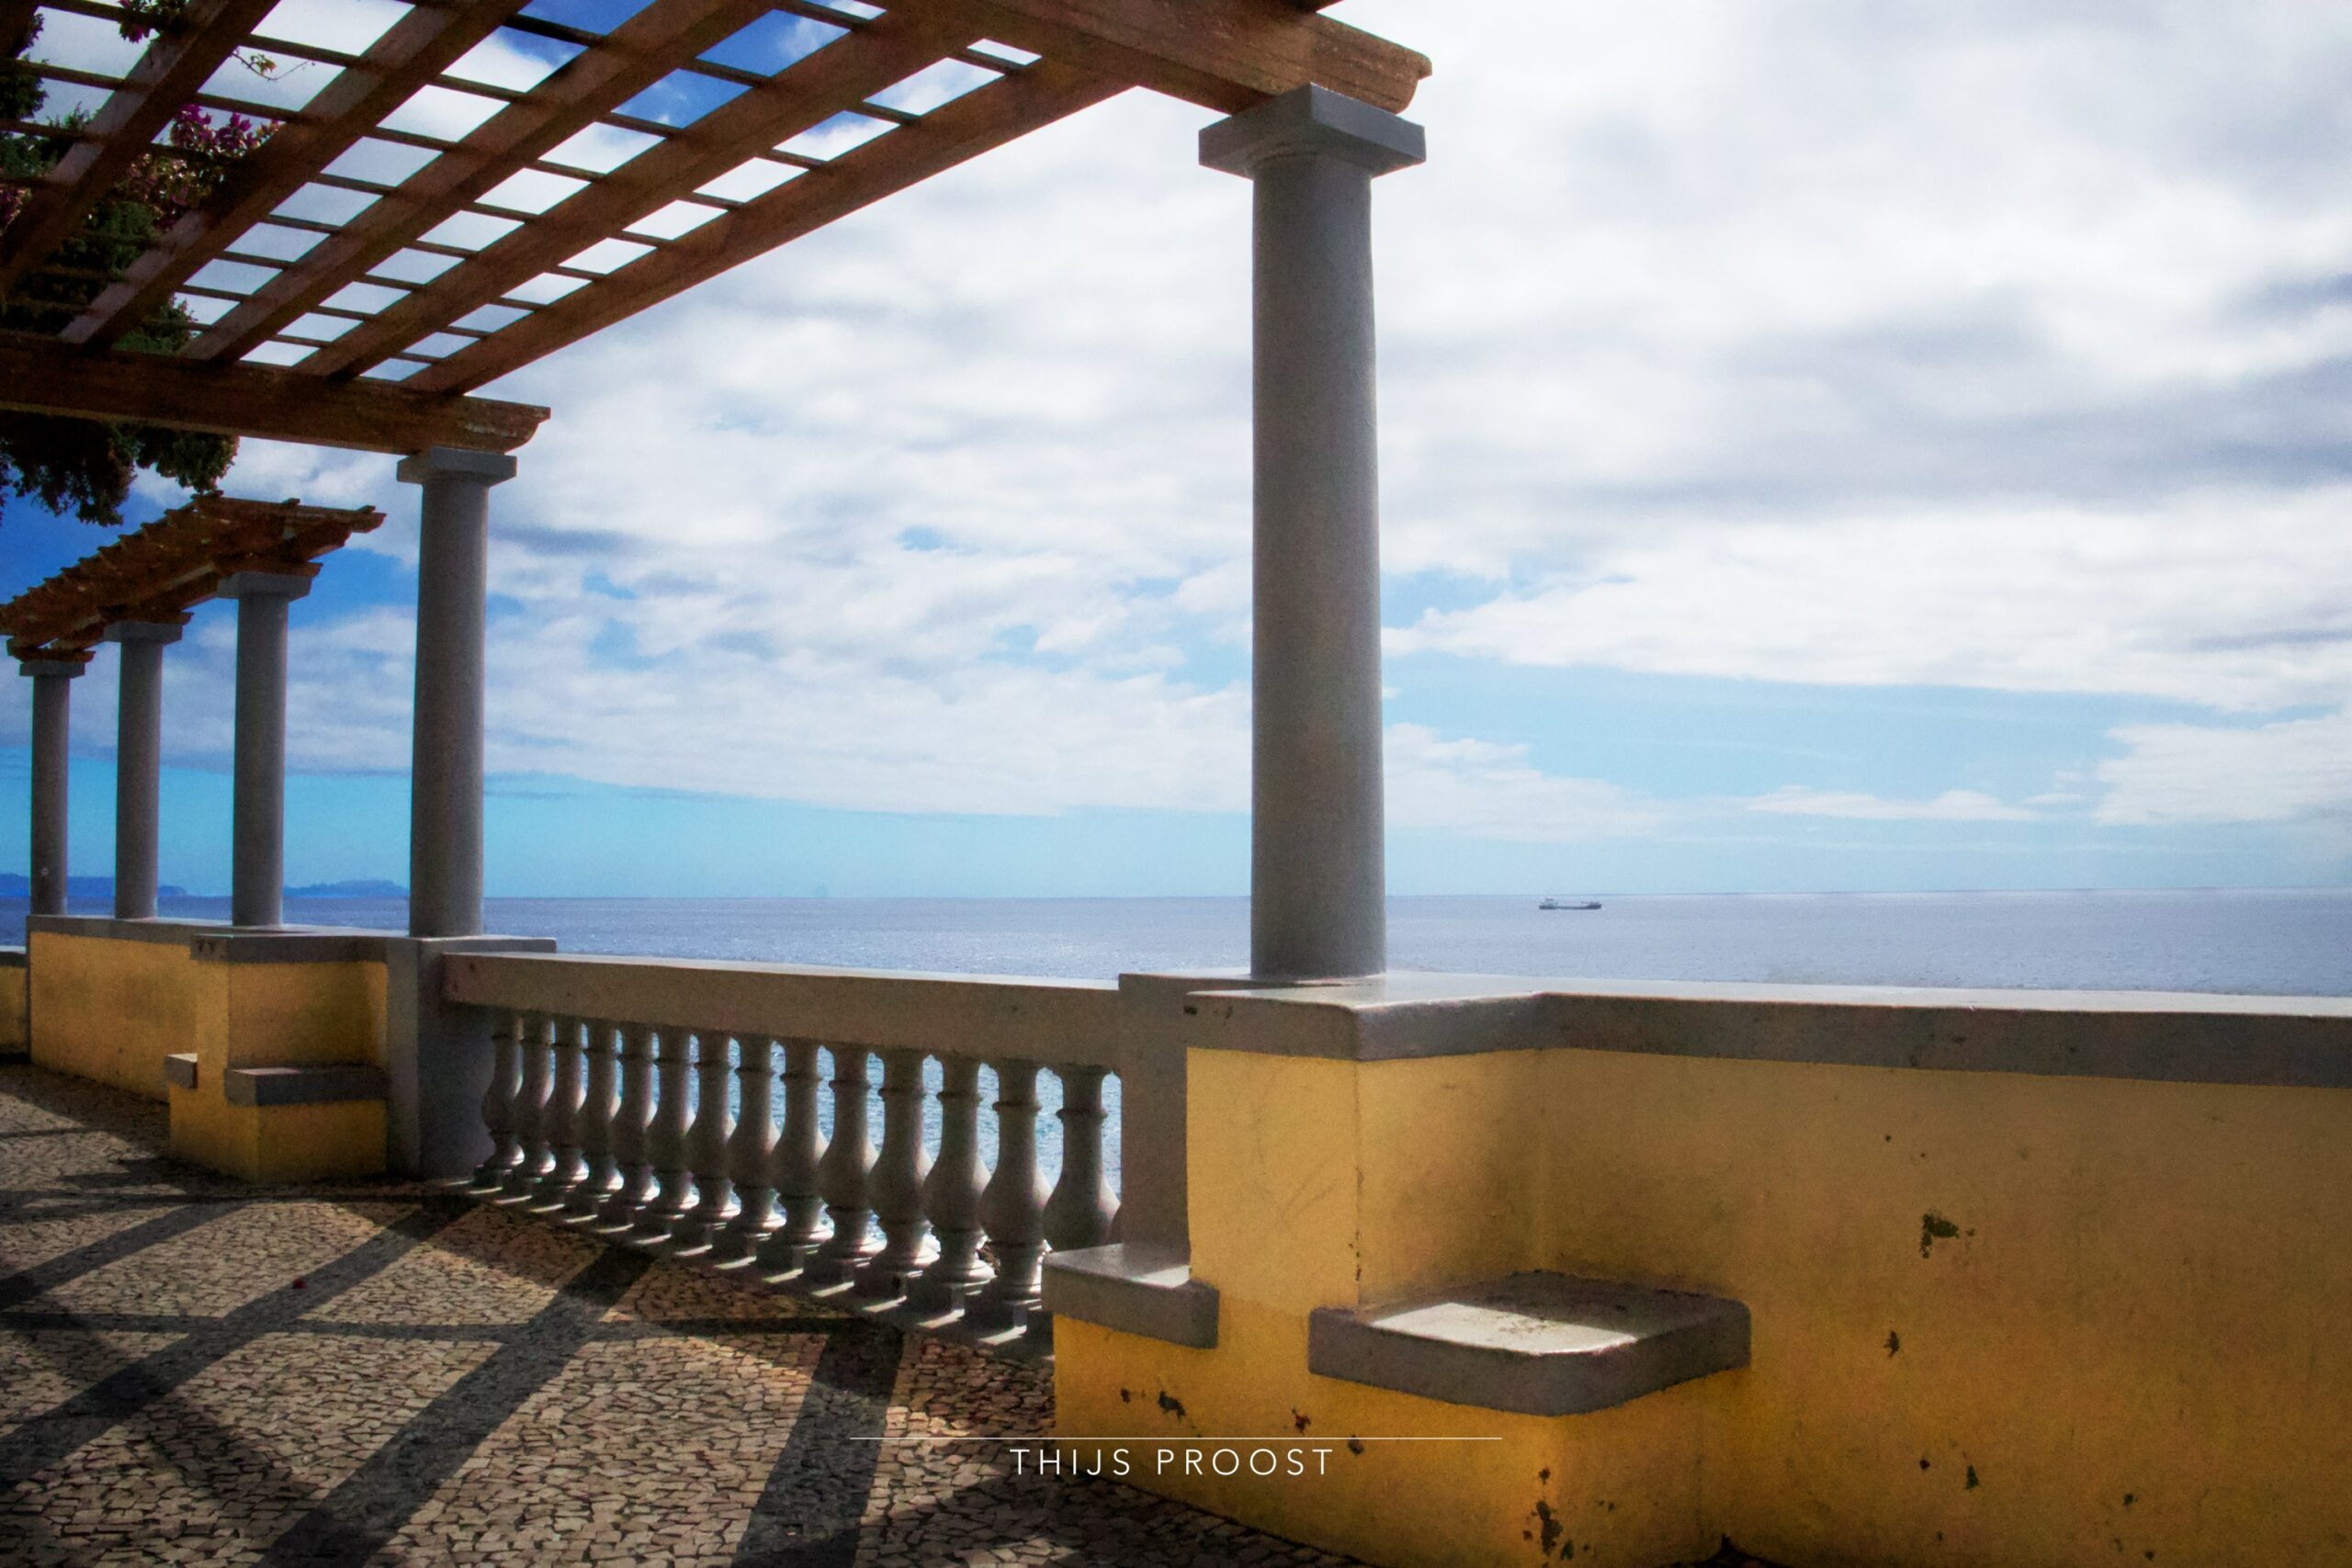 View of the ocean in Funchal on the Island of Madeira.